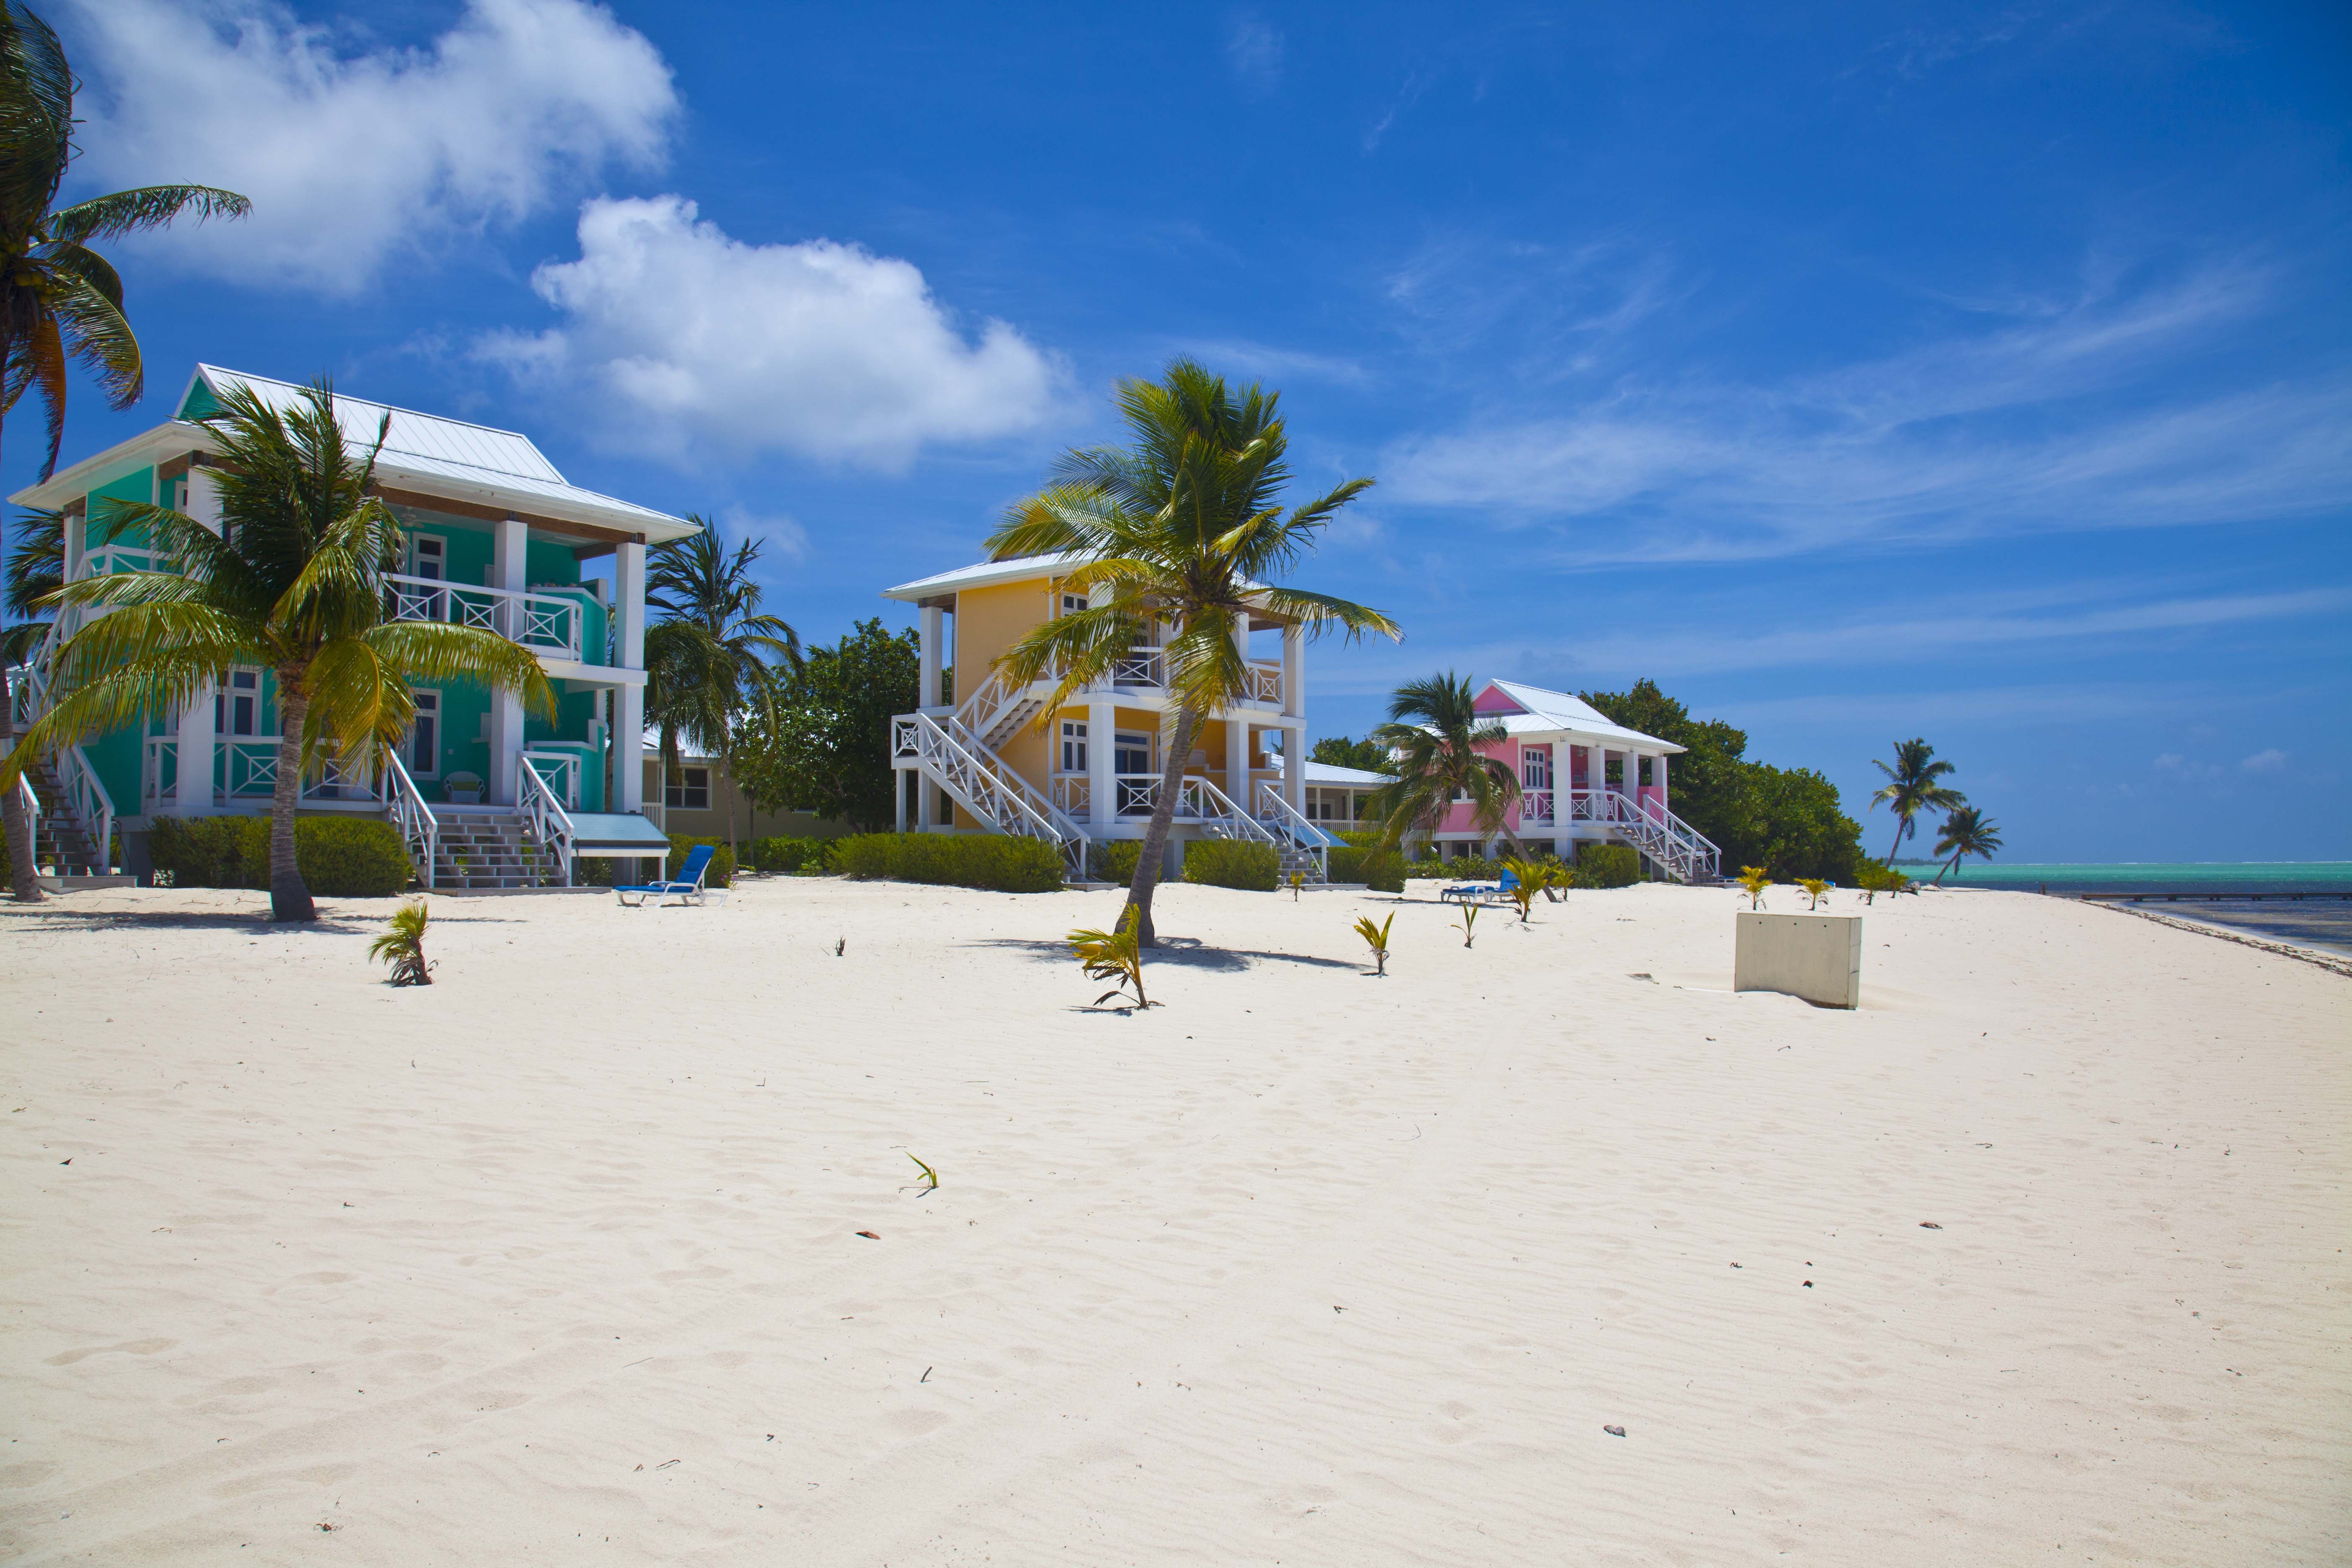 Helpful information when buying real estate in the Cayman Islands